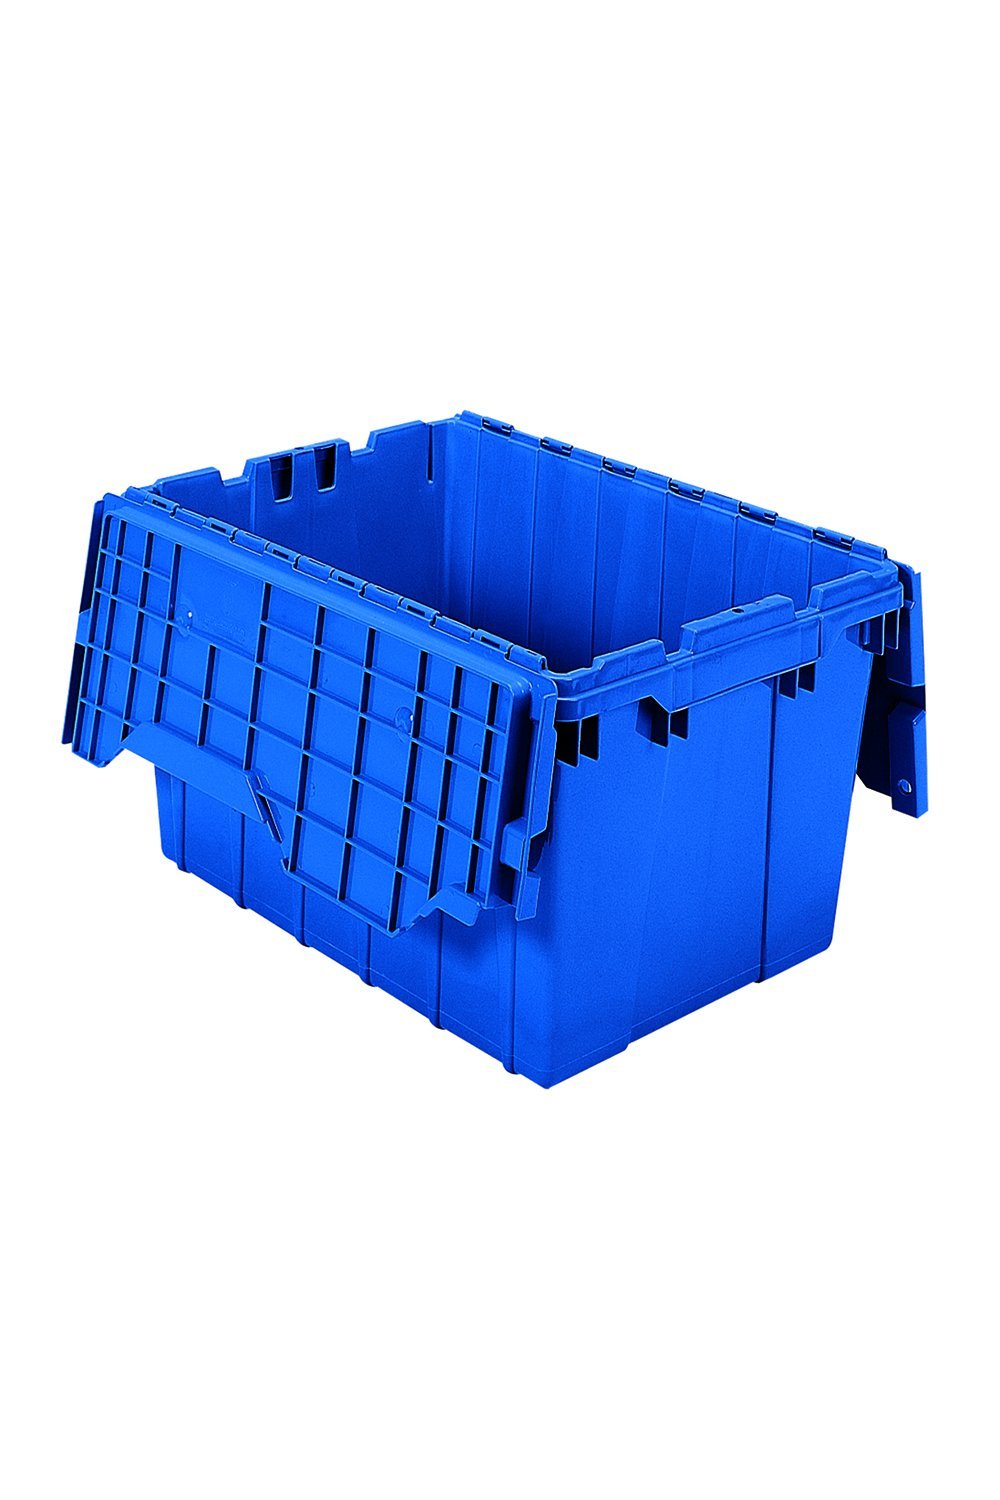 Attached Top Container Bins & Containers Acart 21-1/2"L x 15-1/4"W x 12-3/4"H Blue 